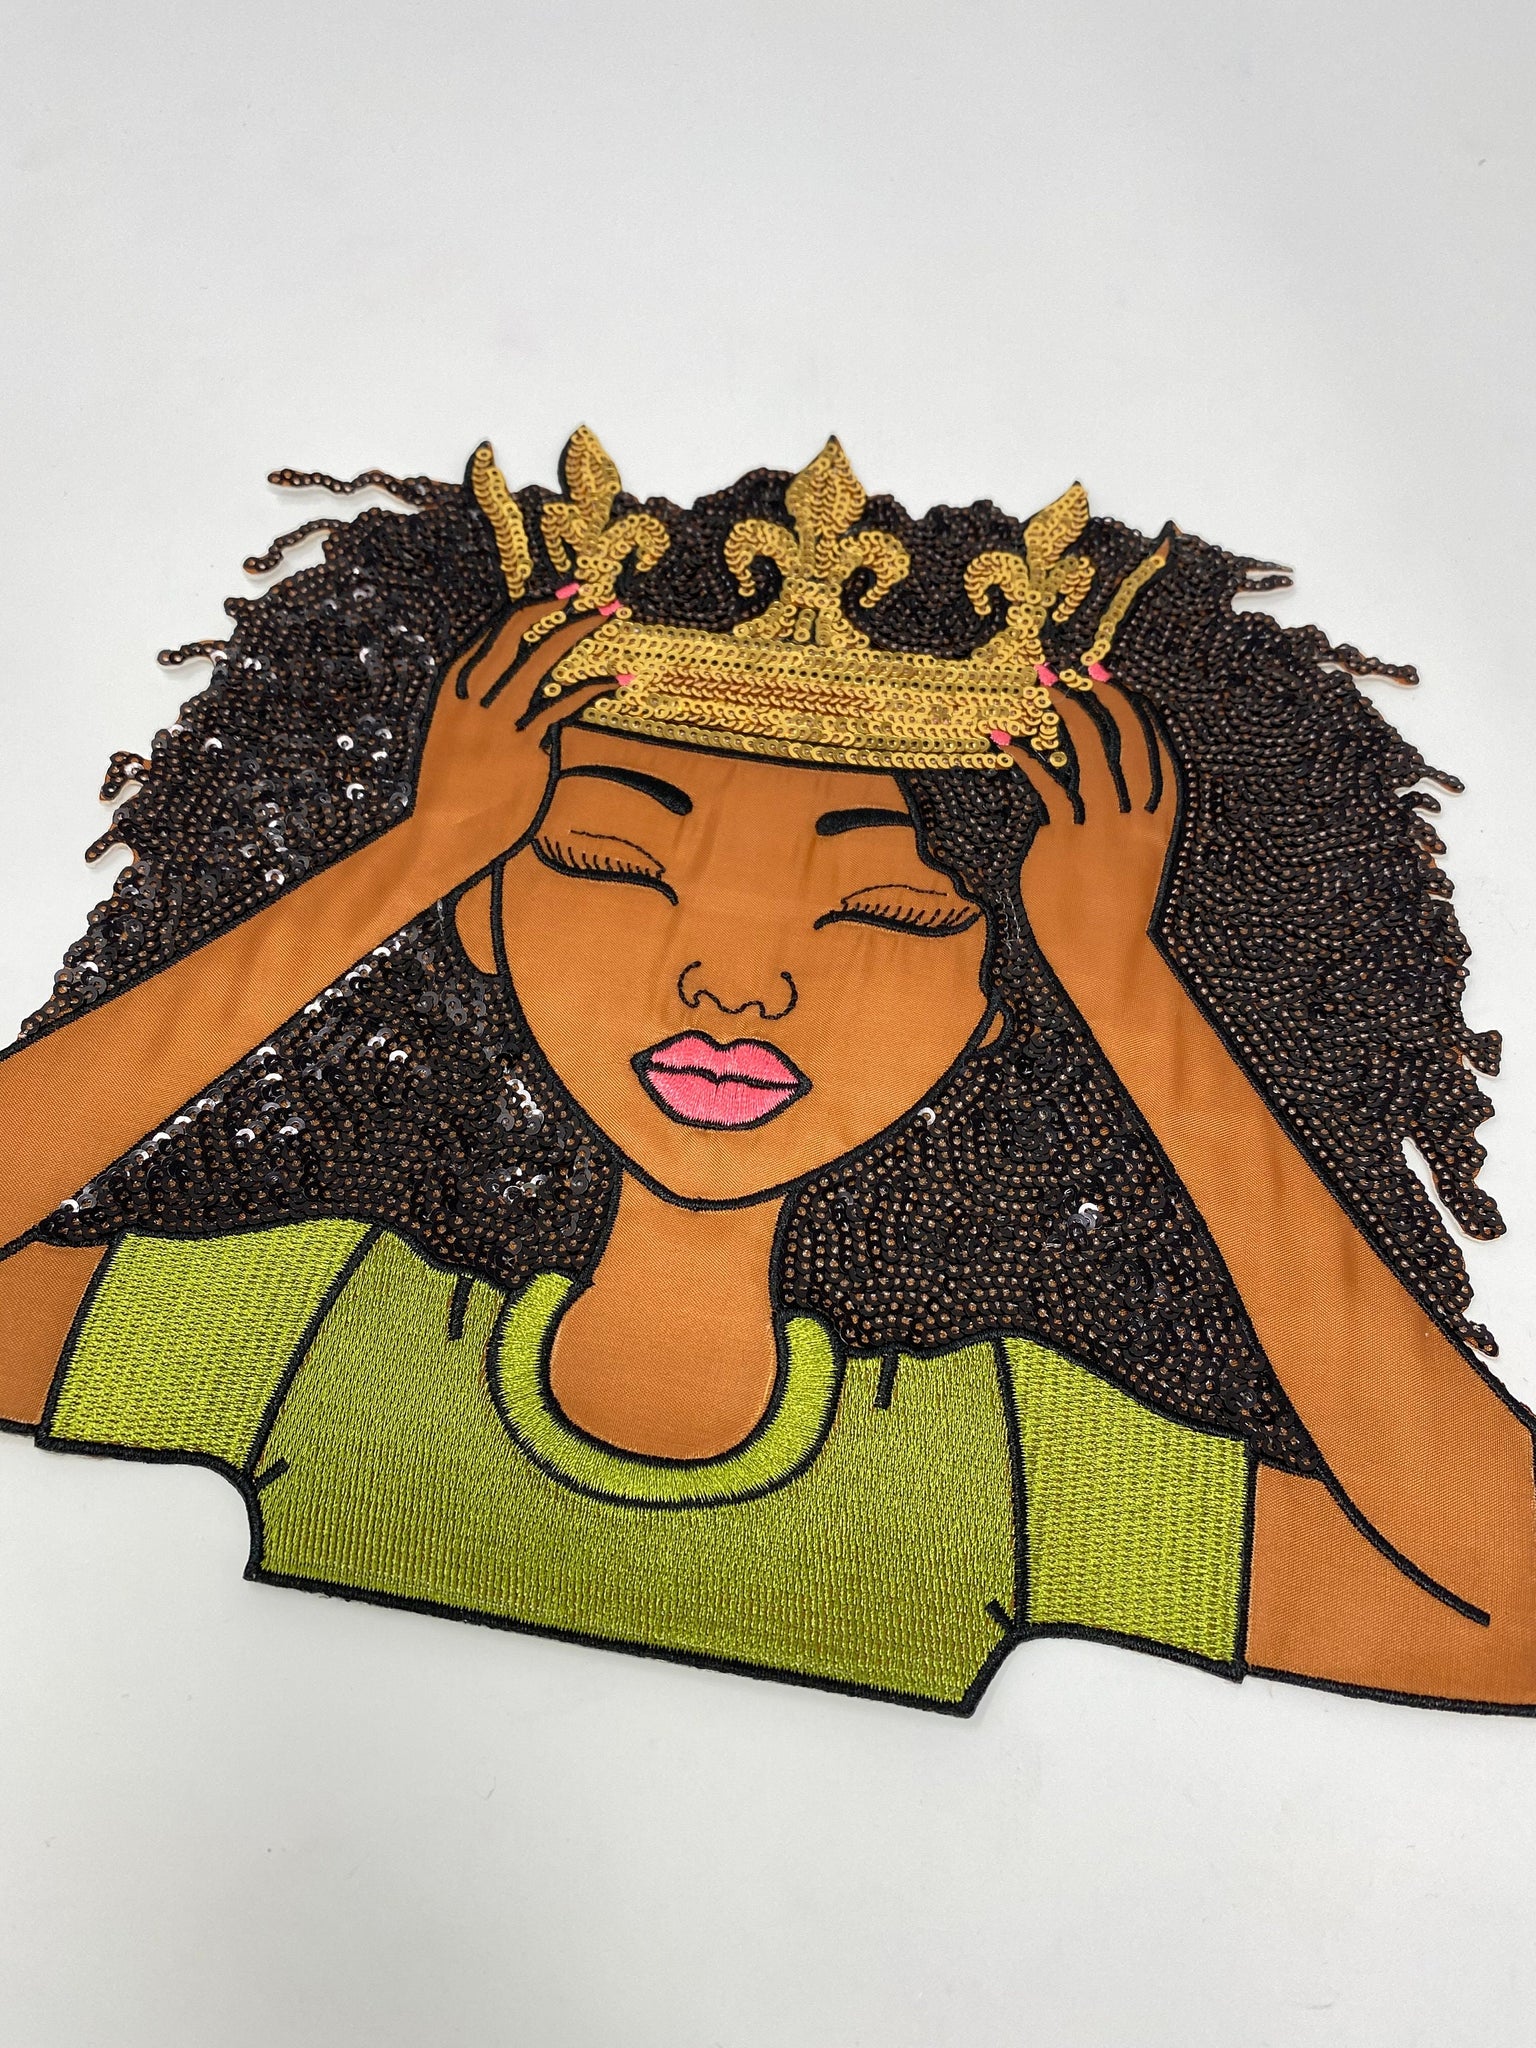 New, SEQUIN & Satin "Adjust Yo' Crown Sis" 9.25" Patch, Iron-on/Sew-on, Exclusive Applique, Large Patch, Sparkling Patch, Embroidered DIY